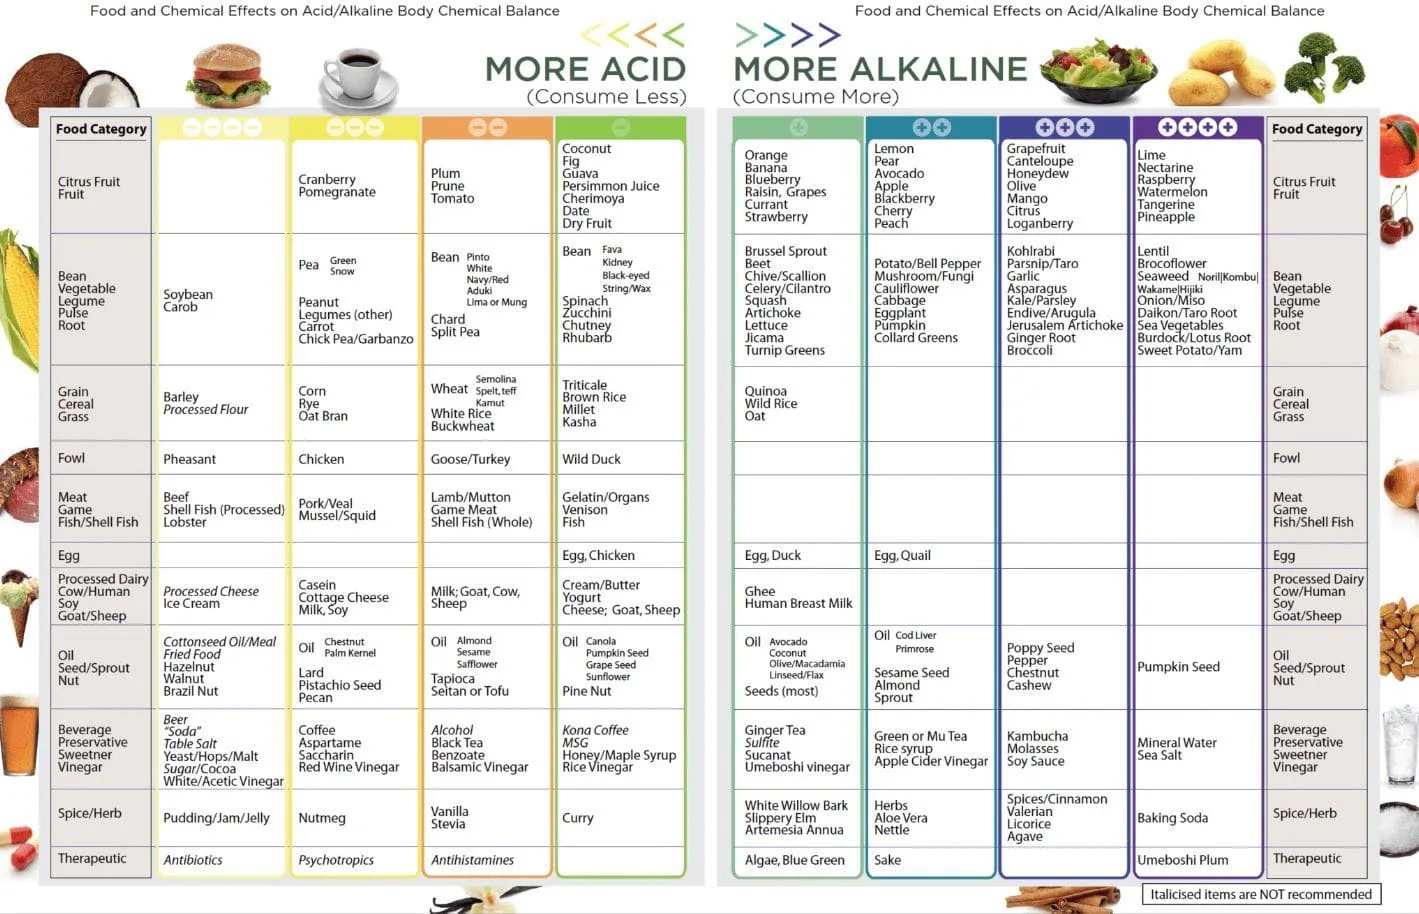 Food & Chemical Effects on Acid/Alkaline